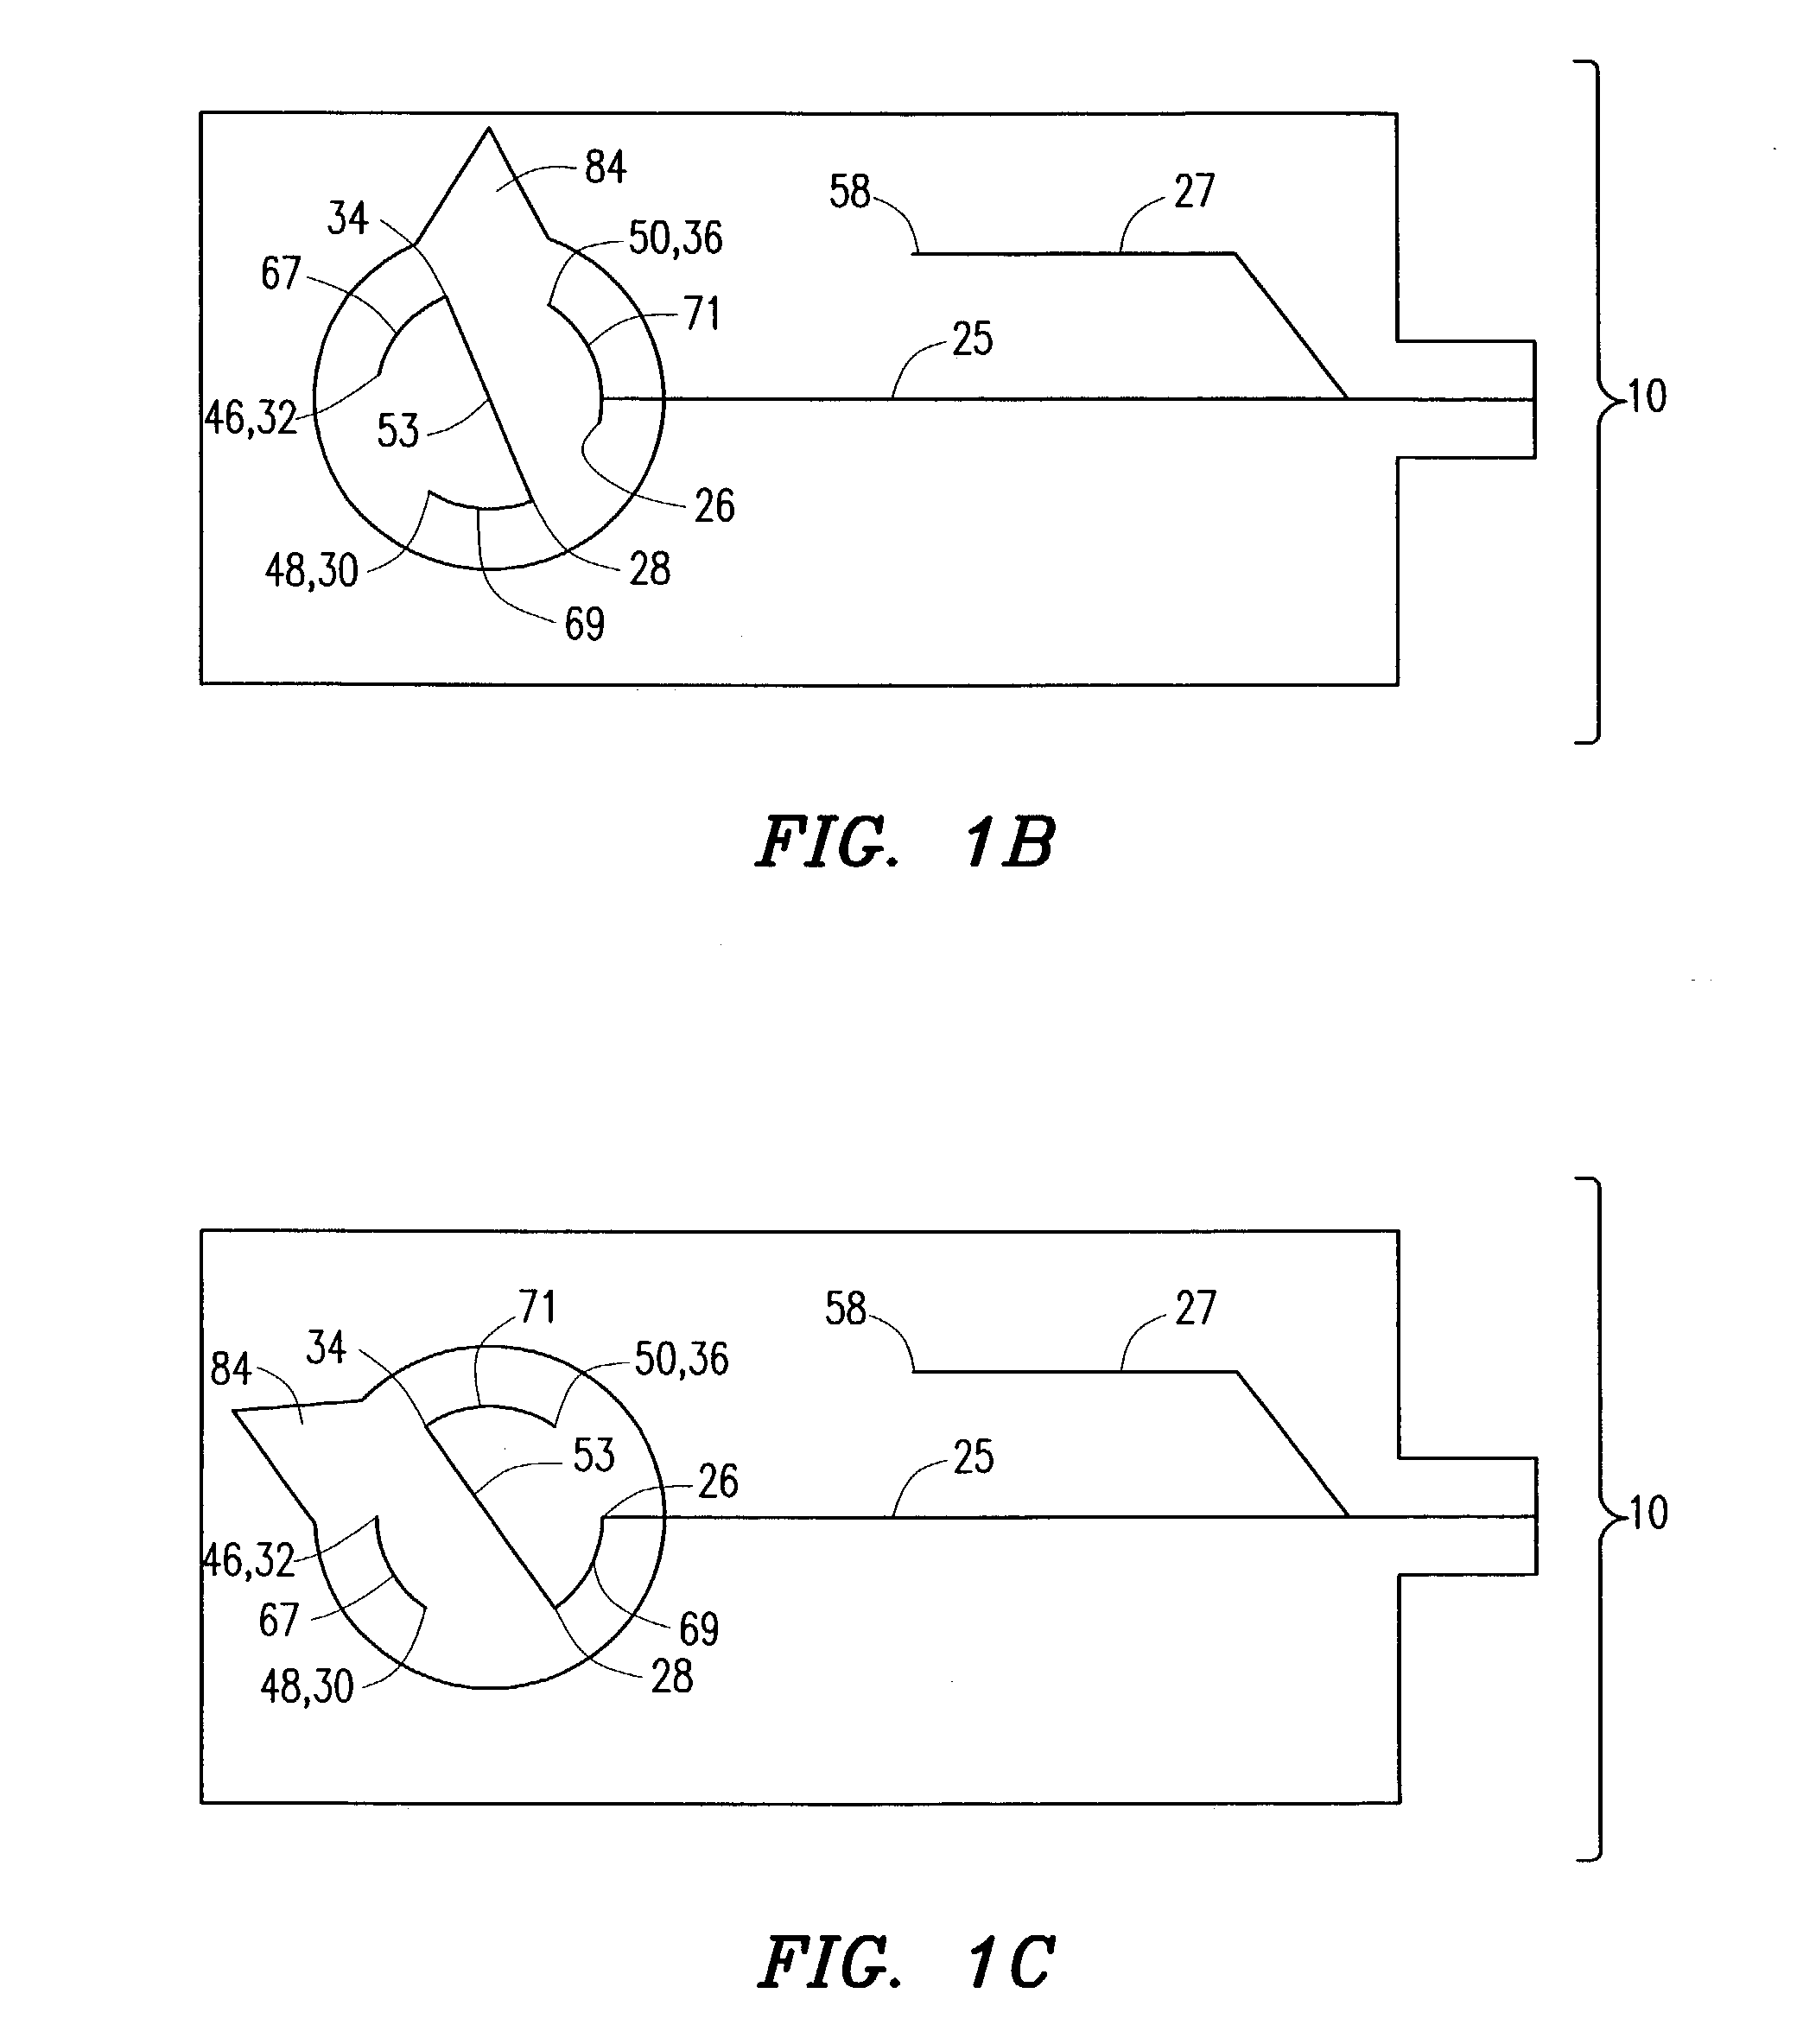 PAEK-based microfluidic device with integrated electrospray emitter